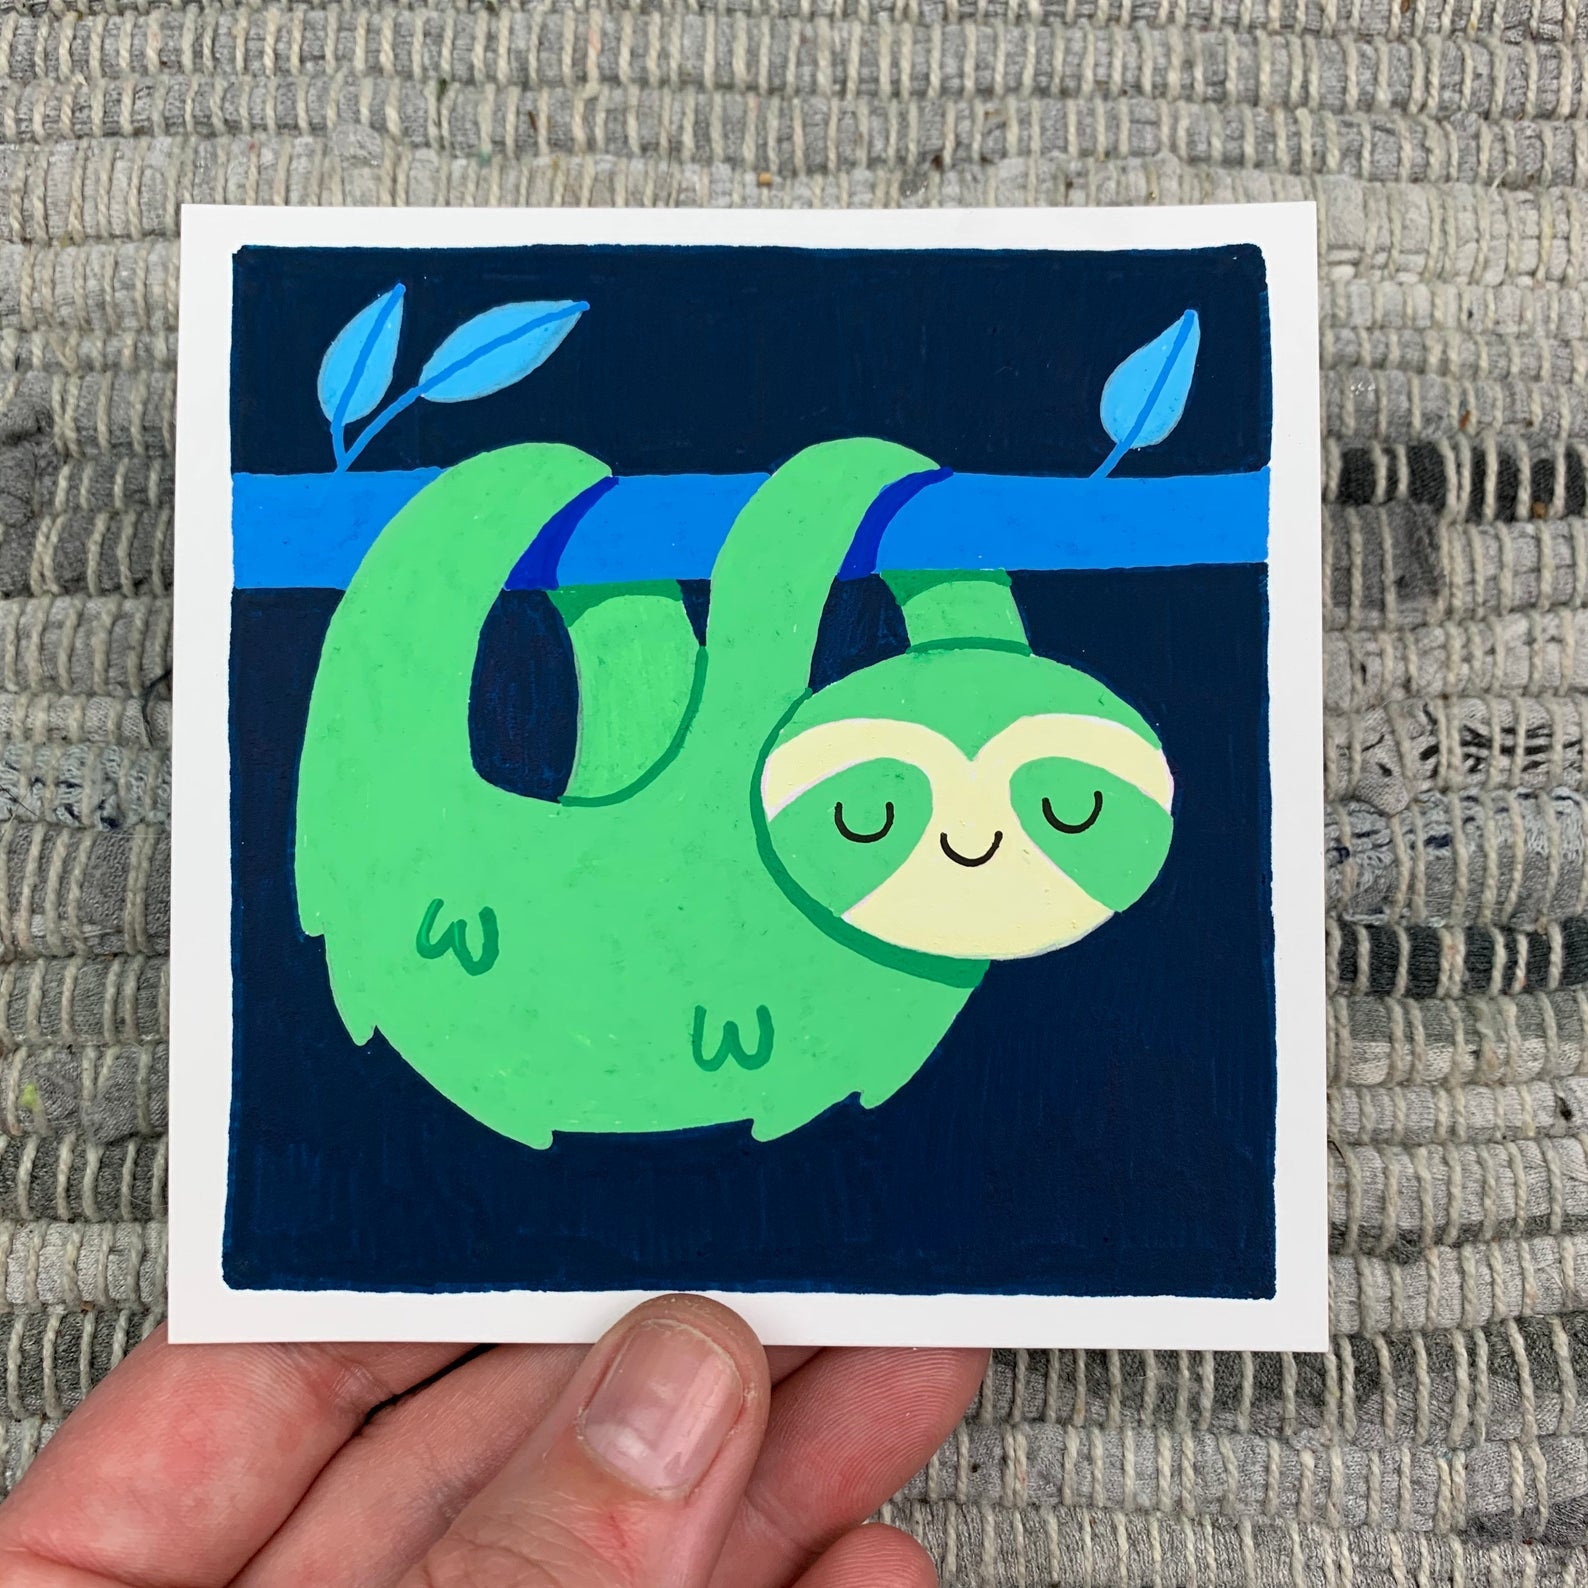 Original artwork of a cute green sloth smiling as he hangs from a blue branch. Materials used: Uni-Posca paint markers.